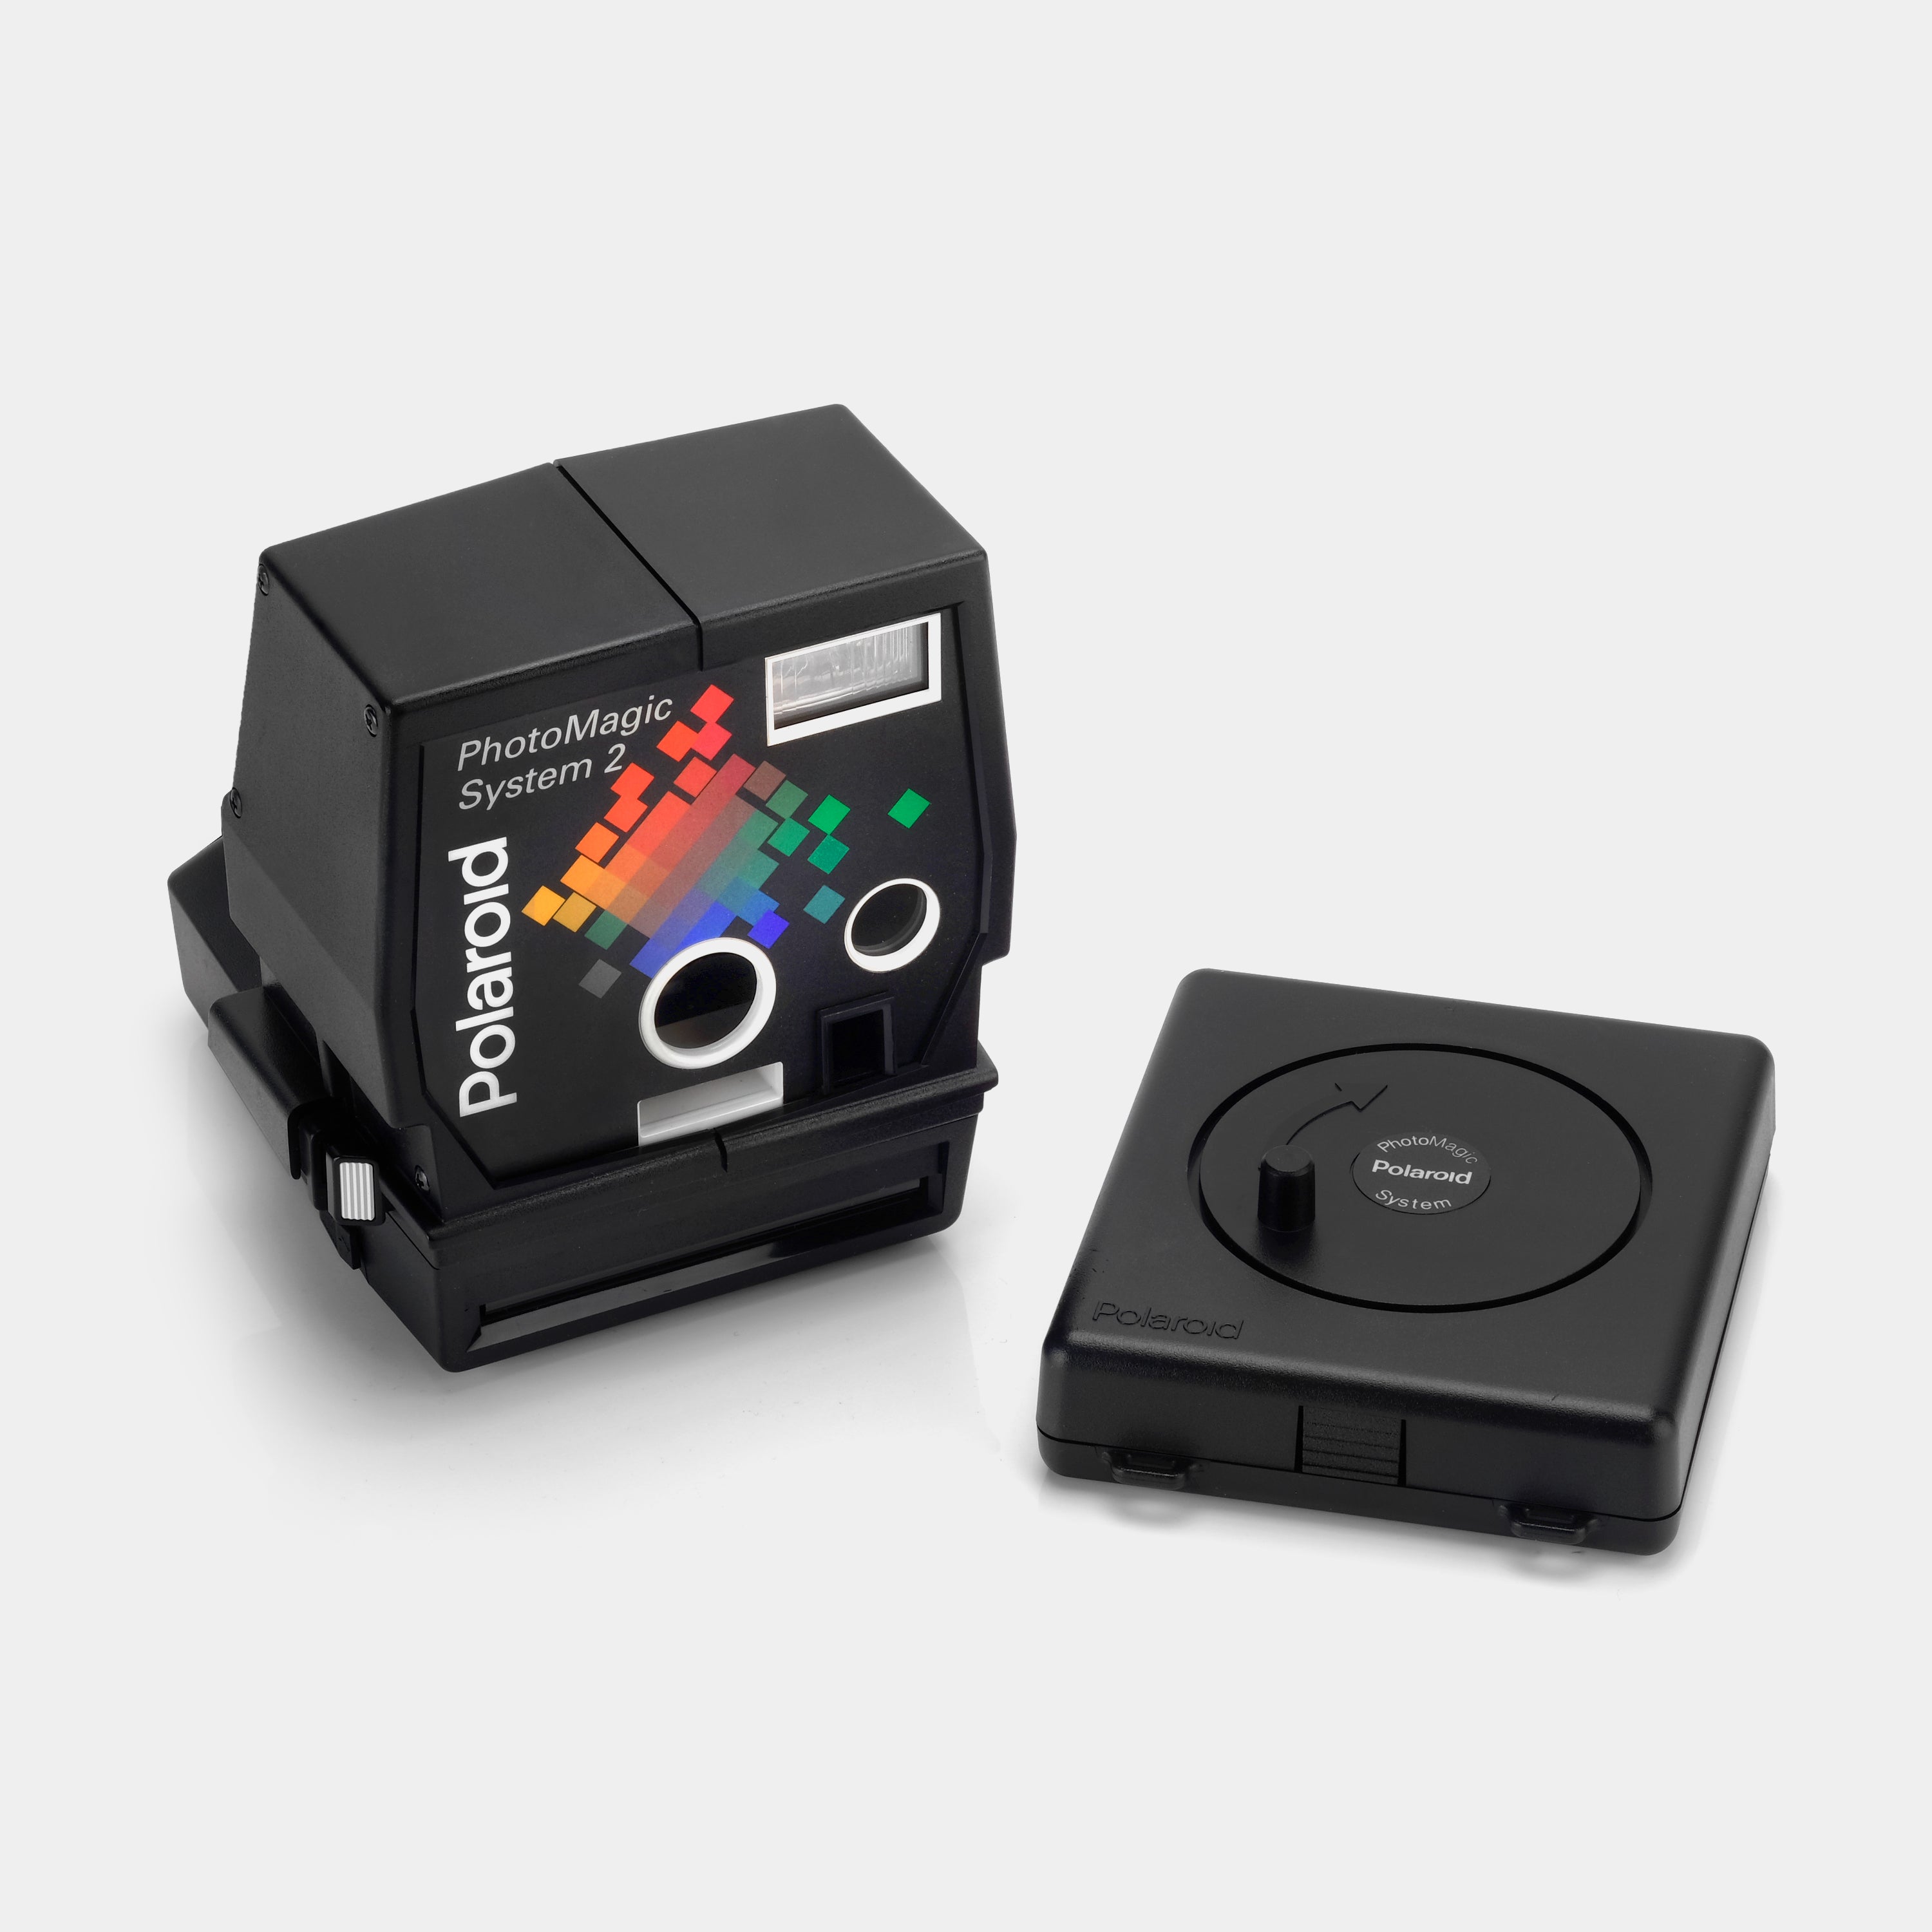 Polaroid Photo Magic System 2 Instant Film Camera with Circular Photo Cutter